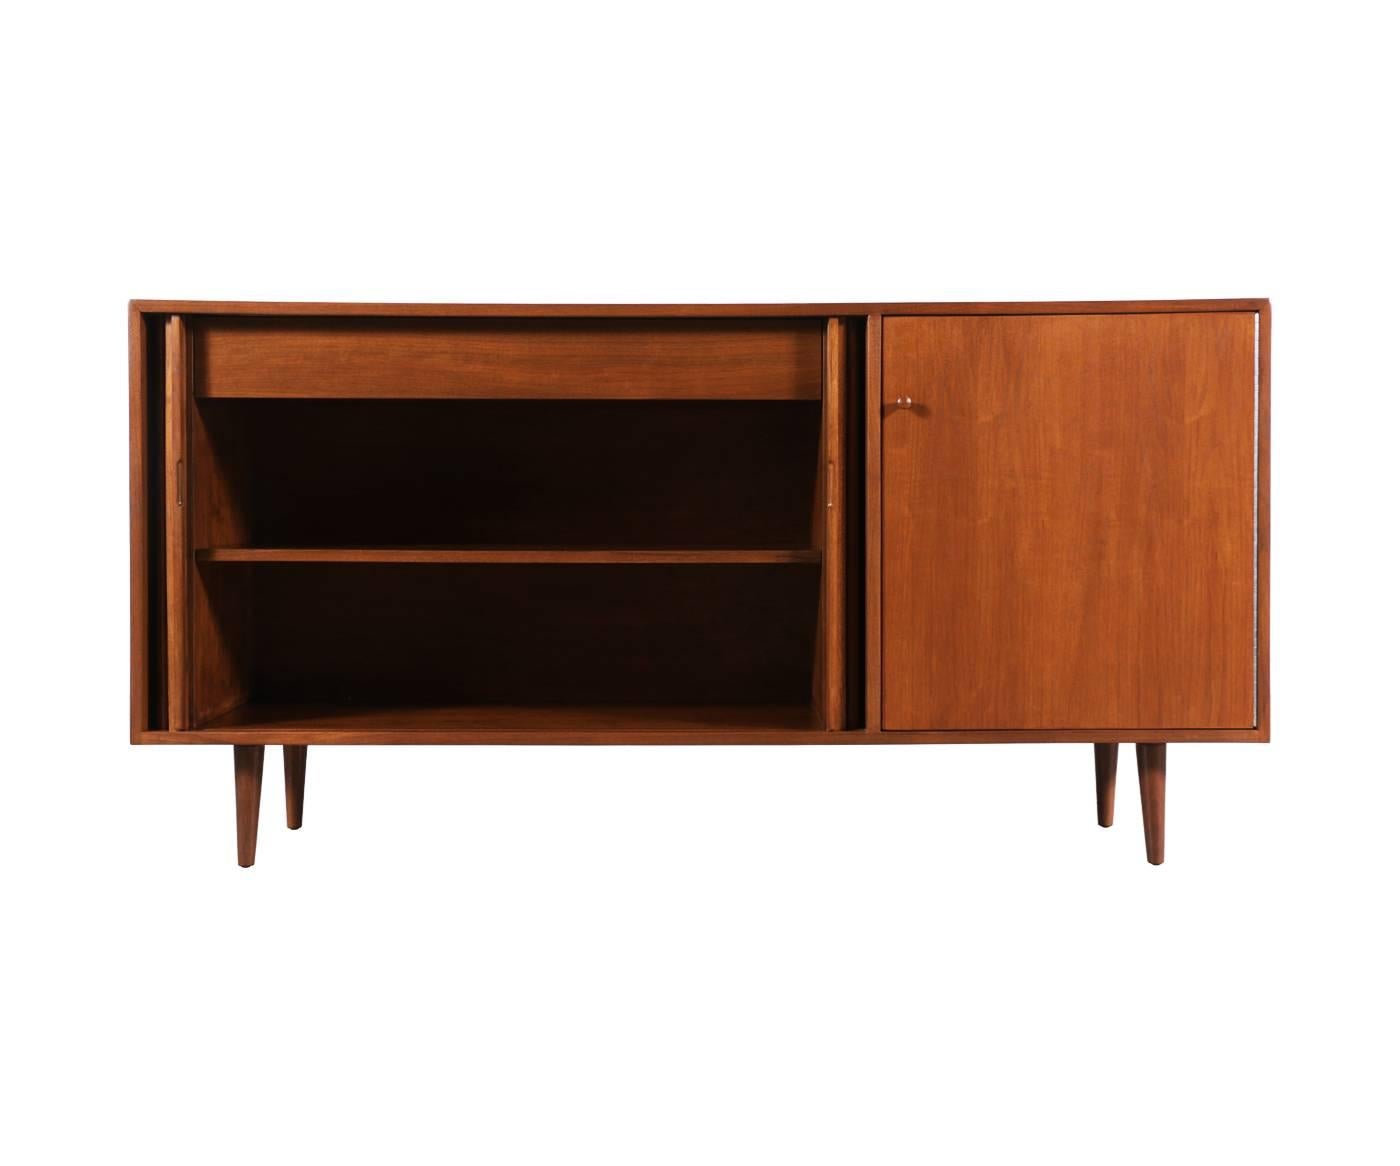 Designer: Milo Baughman.
Manufacturer: Glenn of California.
Period/Style: Mid-Century Modern.
Country: United States.
Date: 1950s.

Dimensions: 32.75″ H x 64.75″ W x 17.75″ D.
Materials: Walnut.
Condition: Excellent. Newly